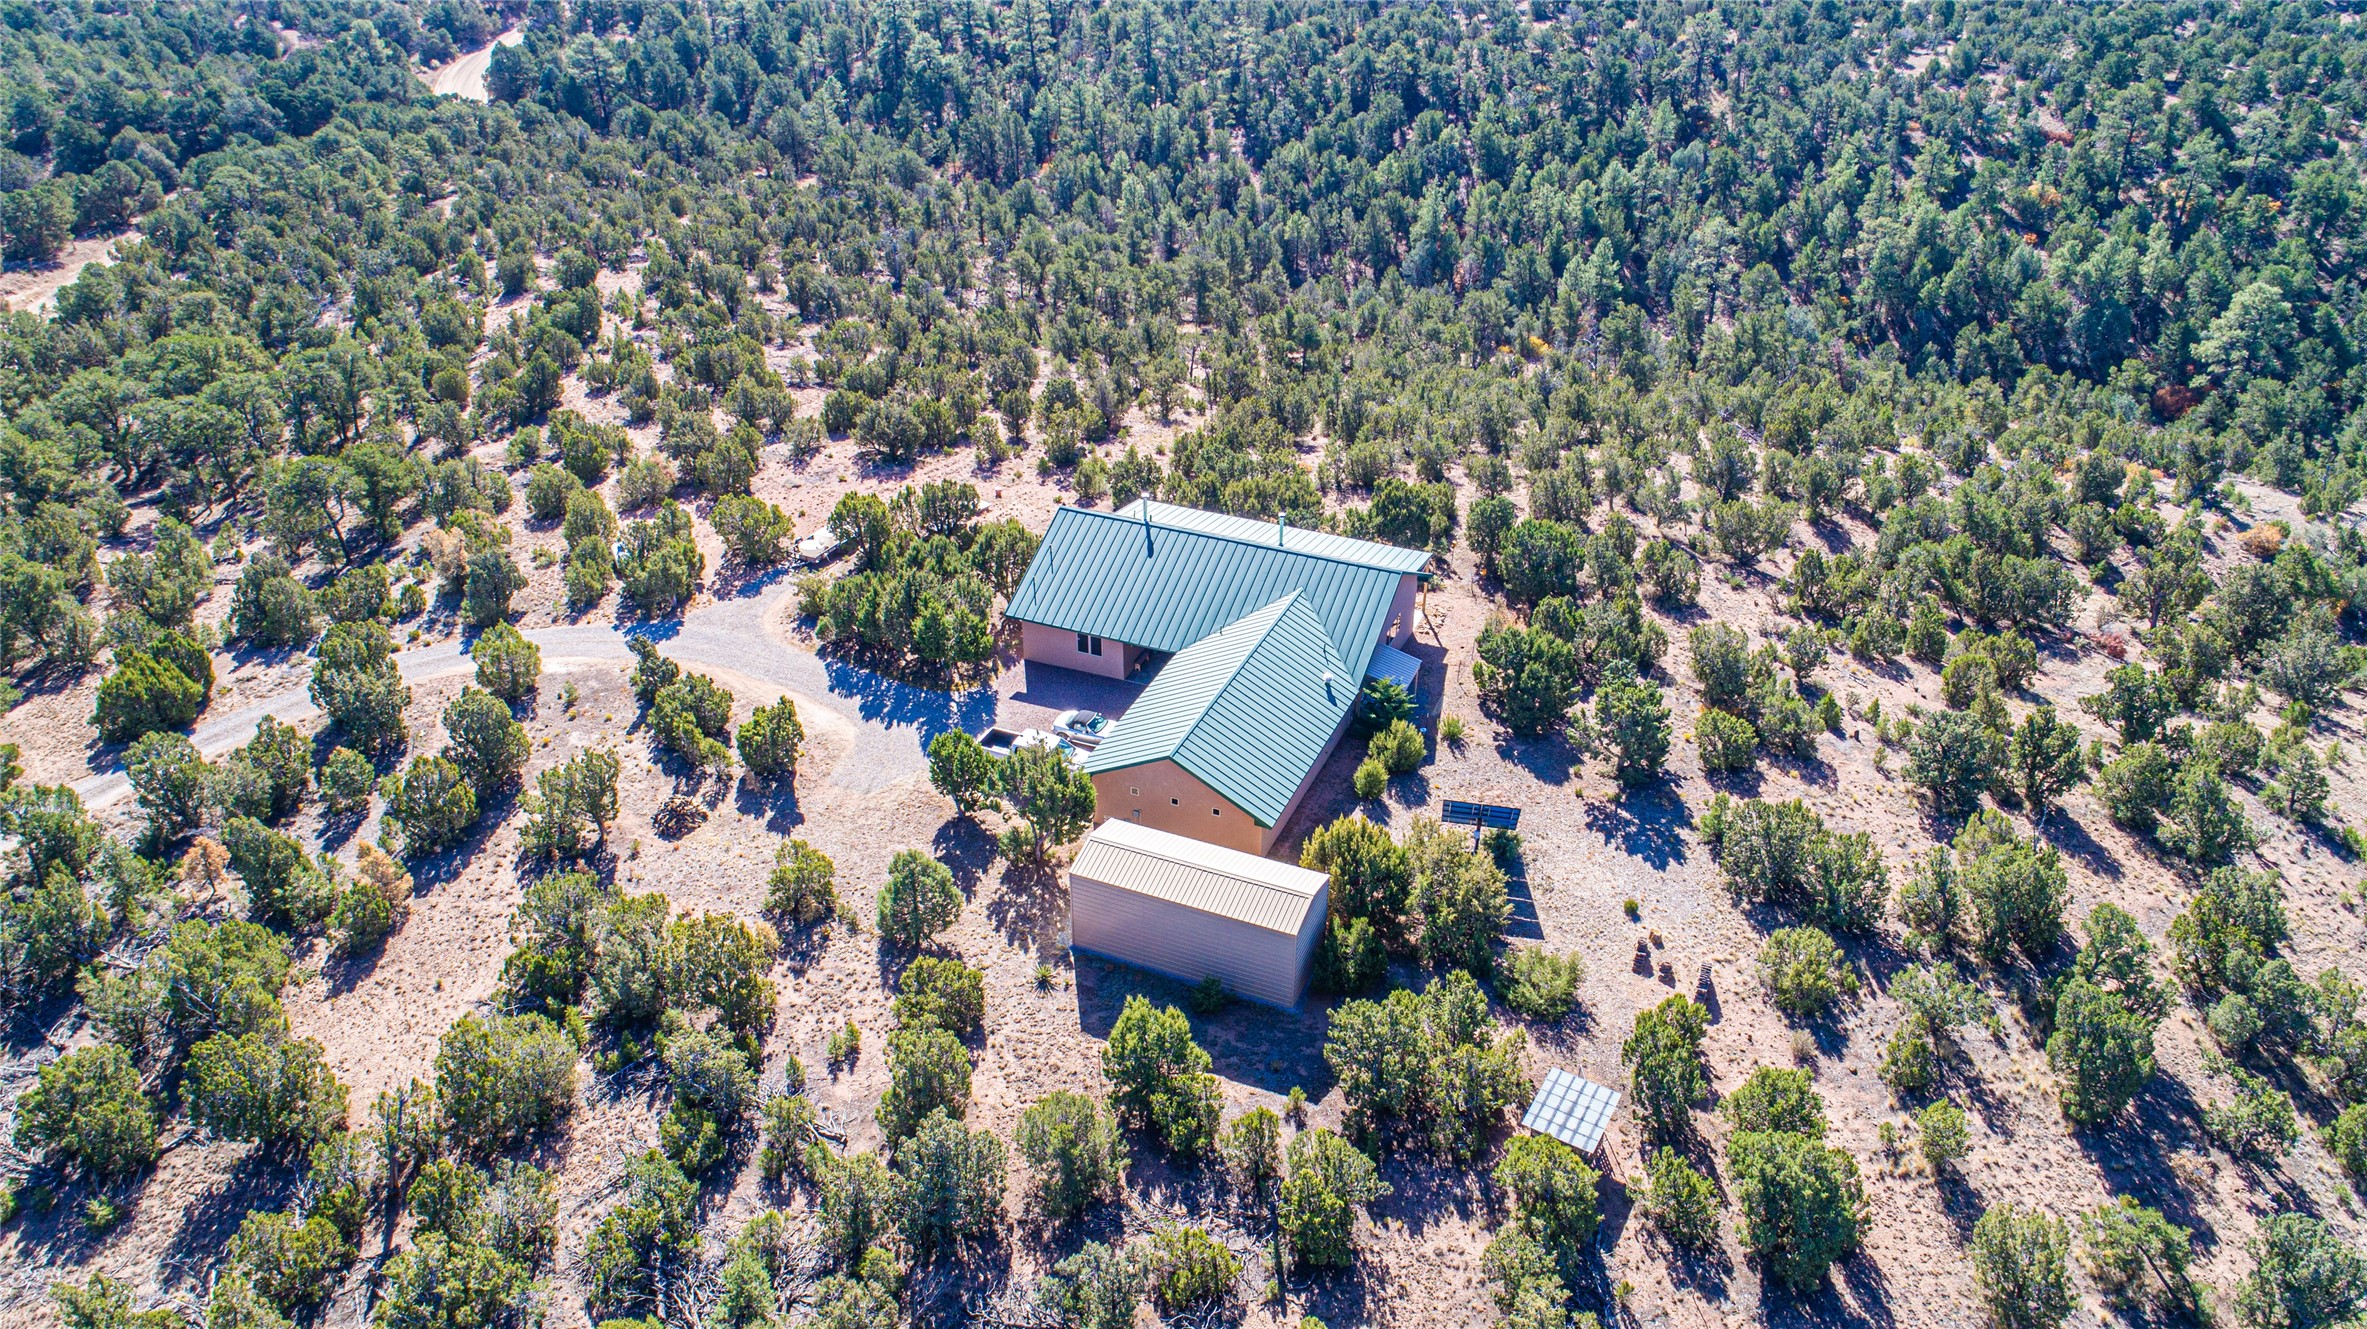 AERIAL SHOT OF THE HOUSE